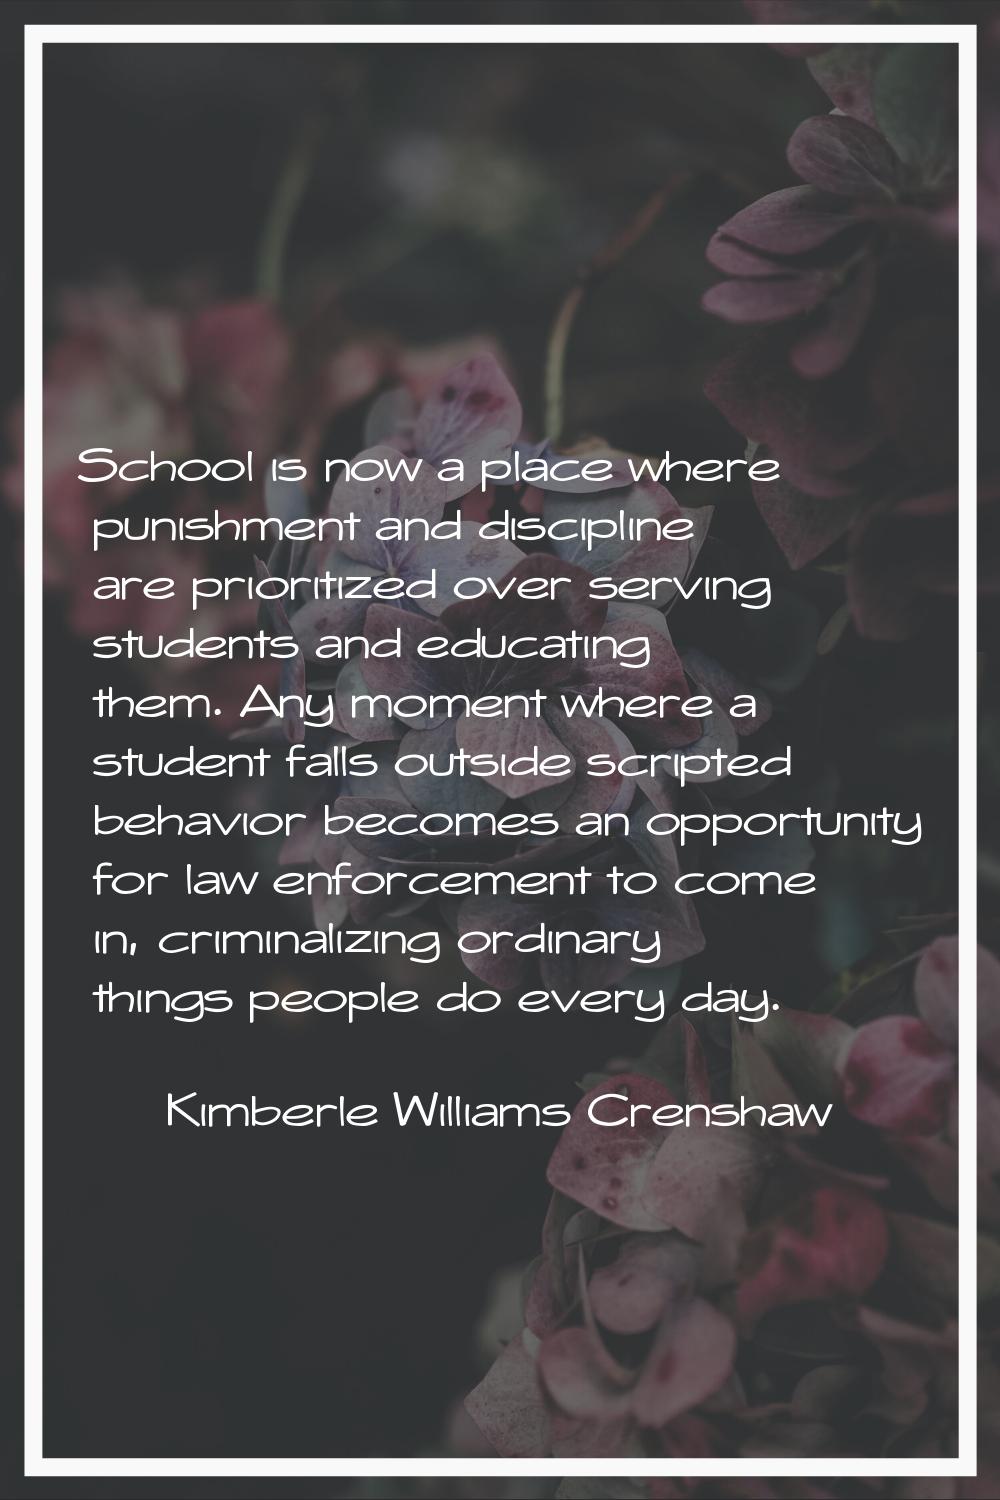 School is now a place where punishment and discipline are prioritized over serving students and edu